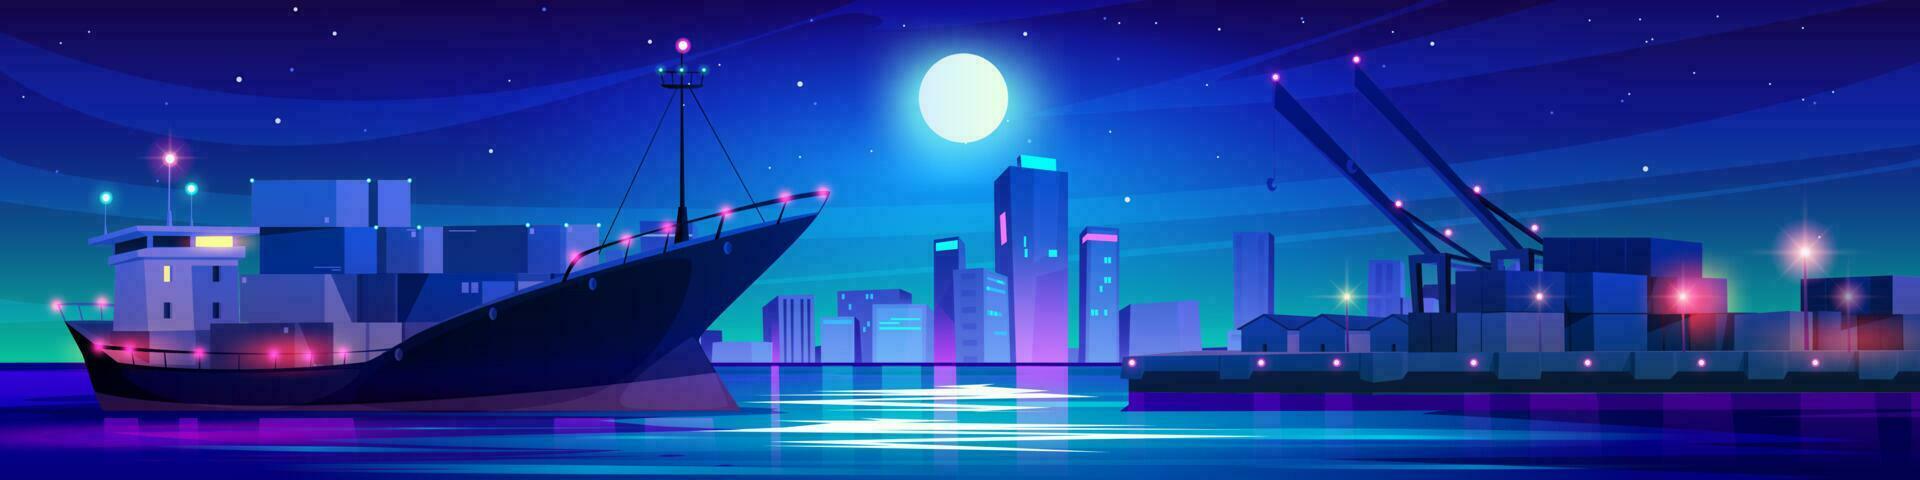 Night port with cargo container and ship vector